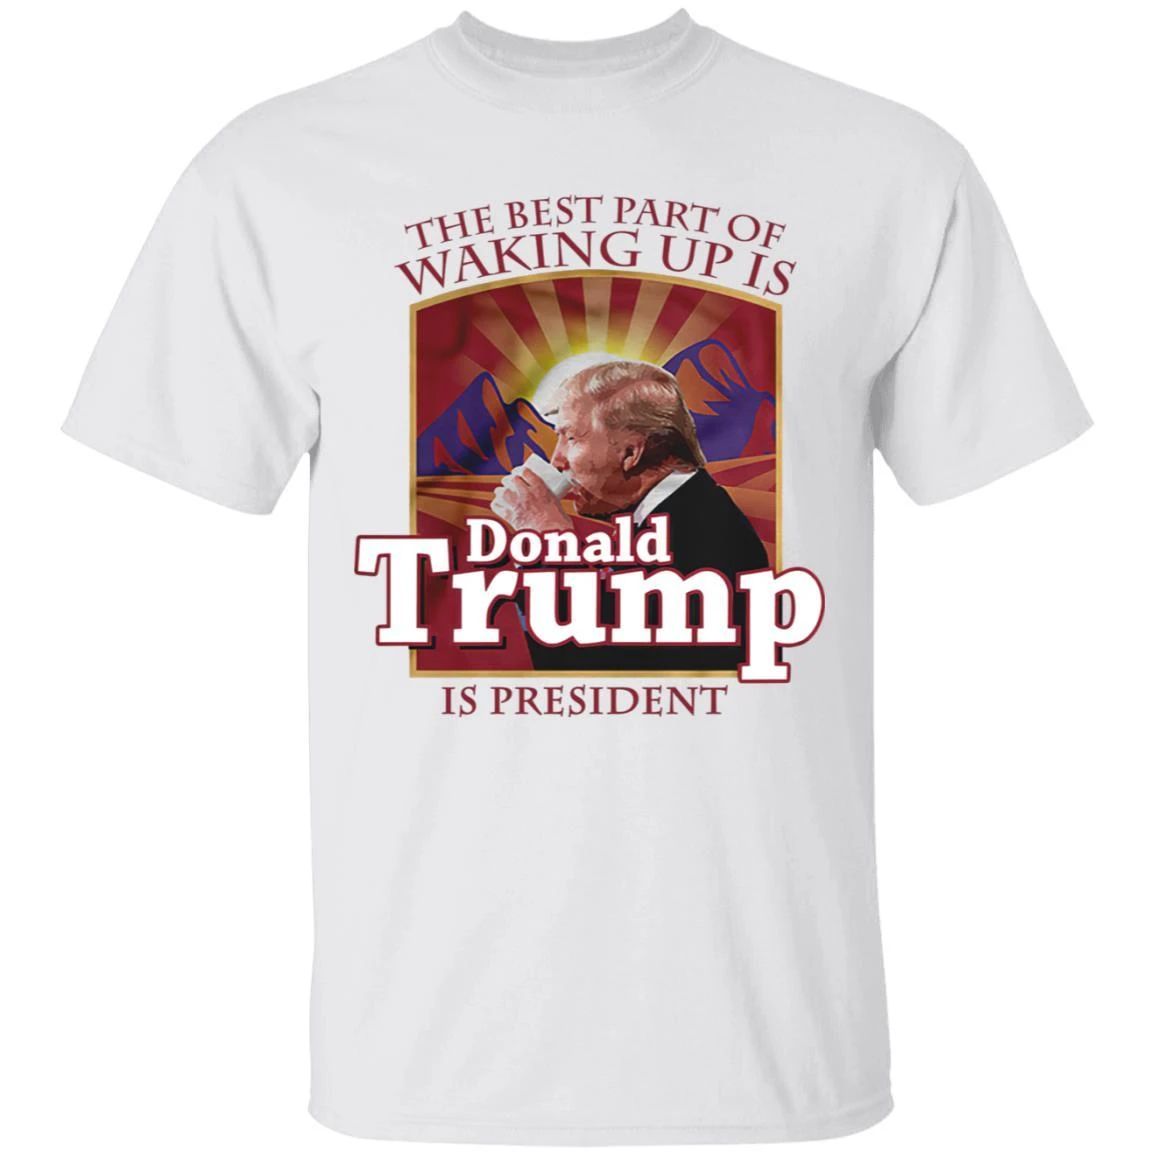 The Best Part Of Waking Up Is Donald Trump Is President Folgers T-shirt